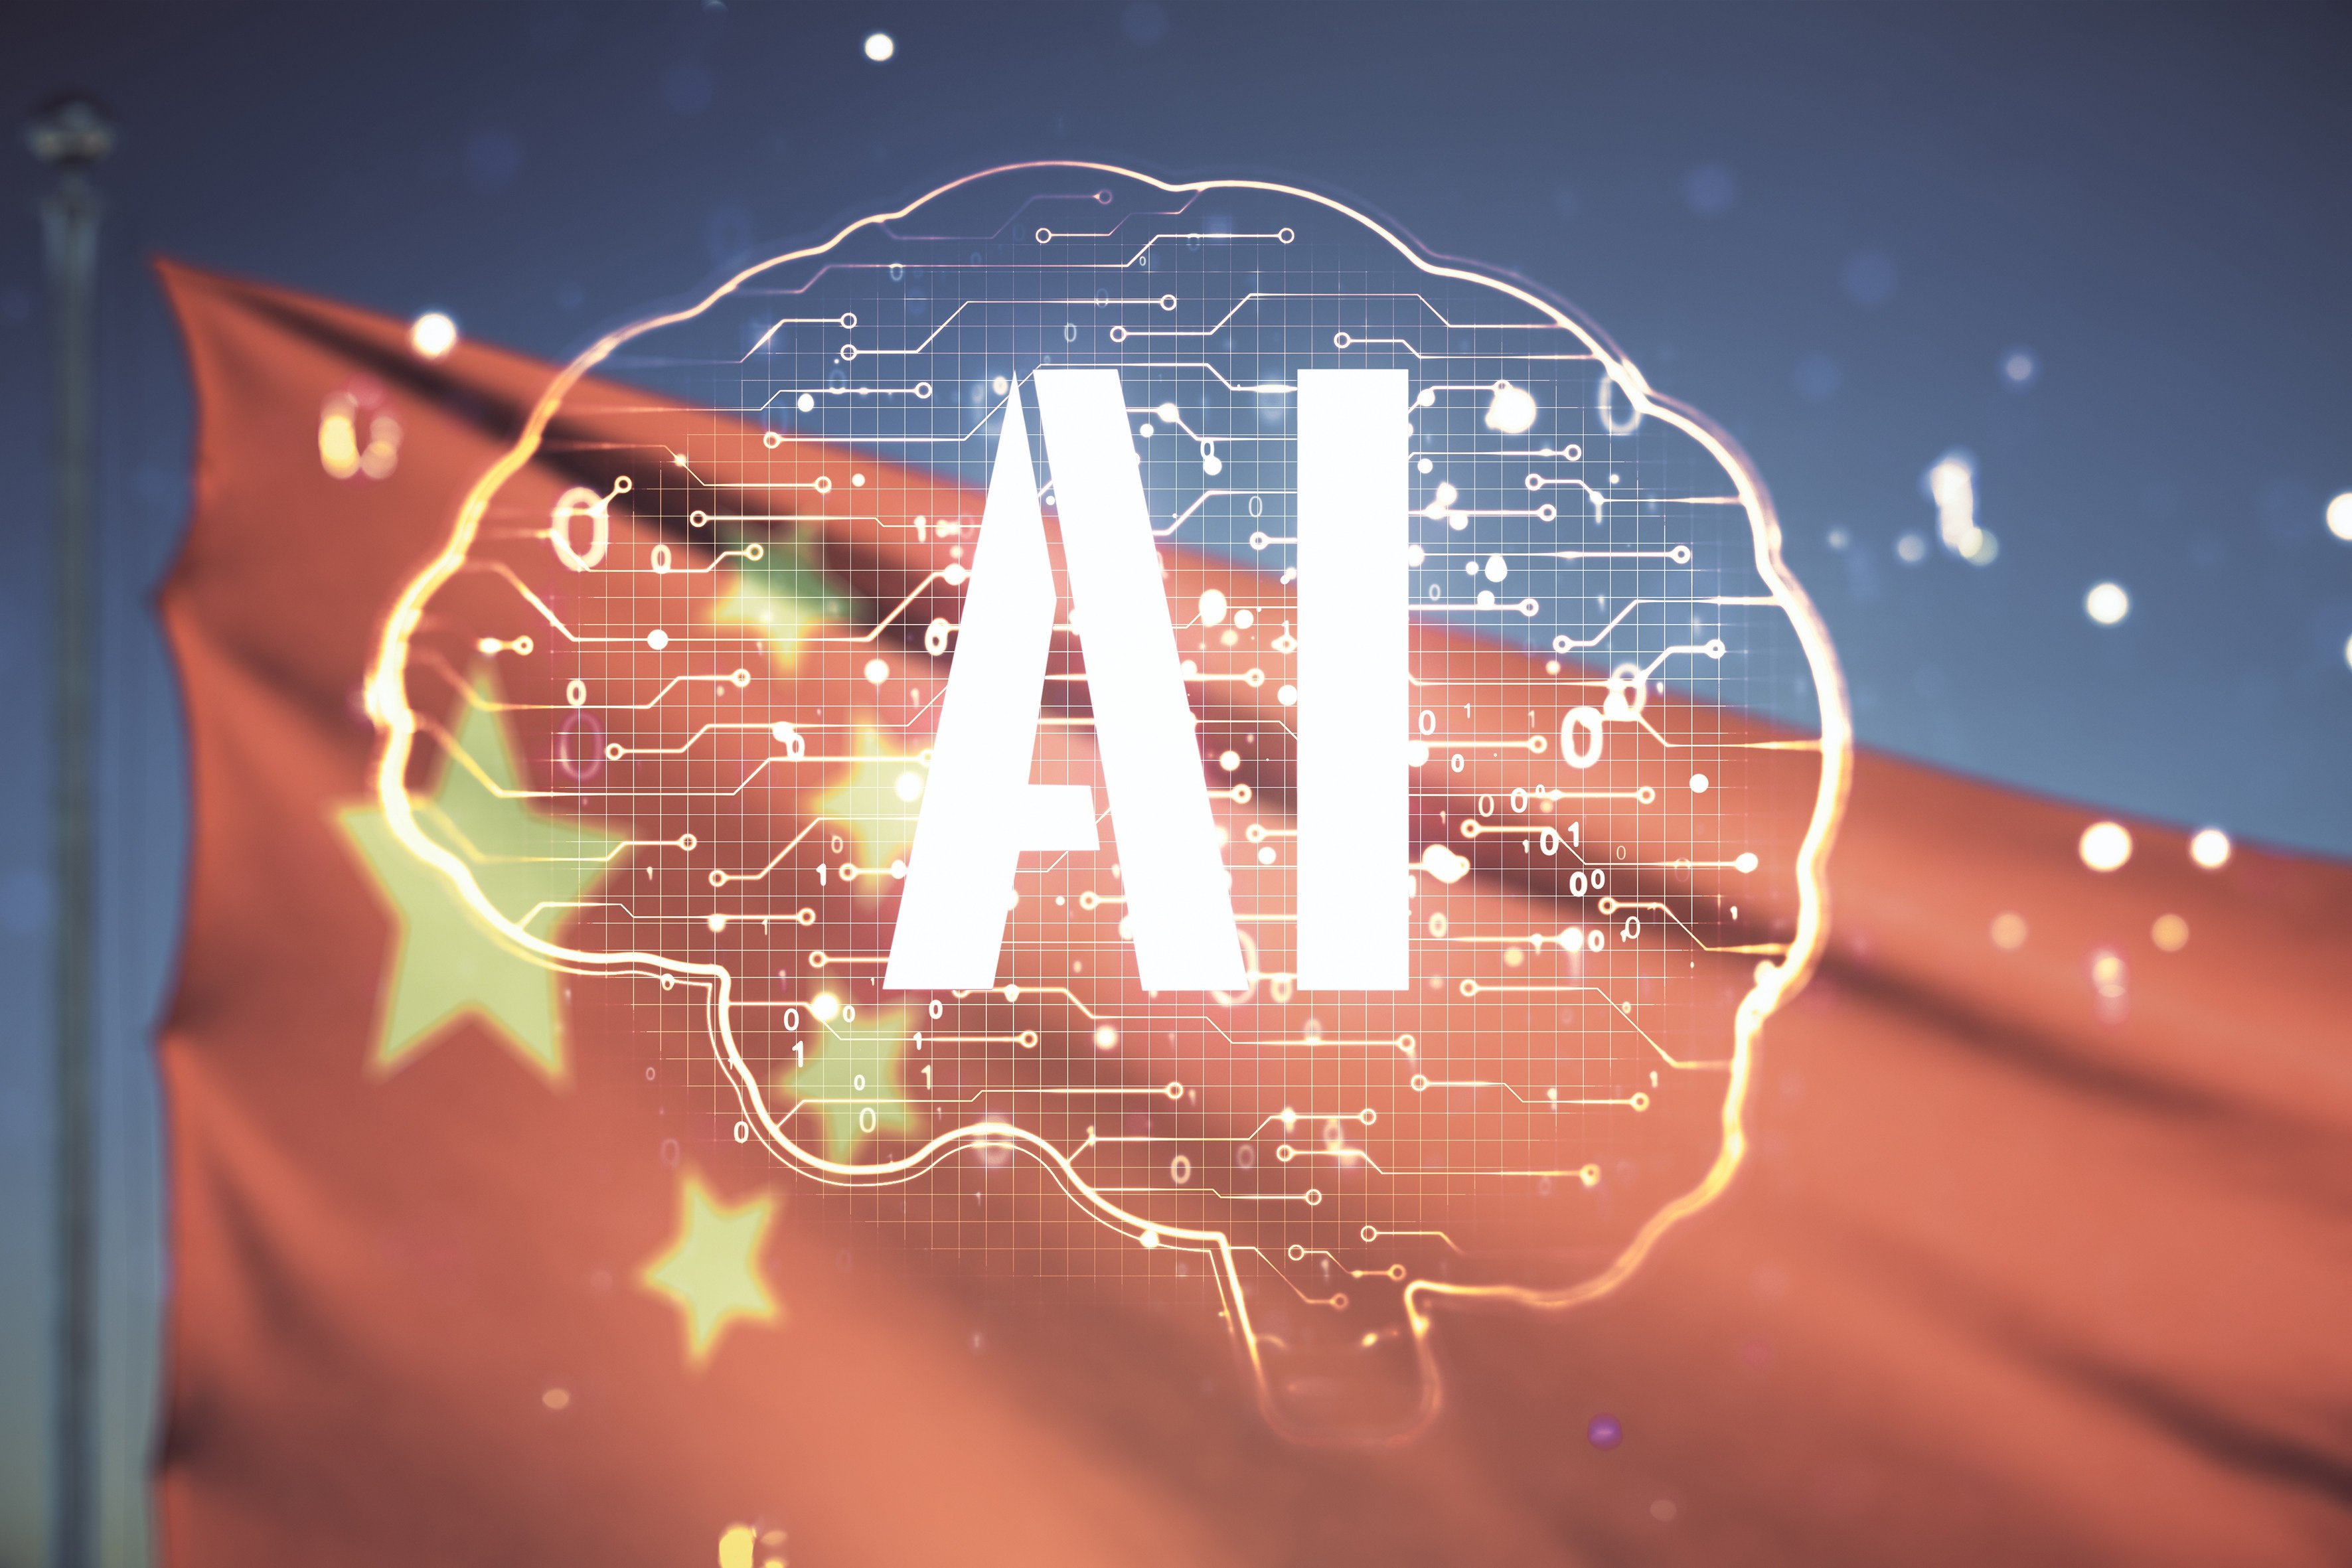 China seeks to integrate AI in traditional sectors, including higher education, to stimulate innovation so it does not fall behind in the global AI race. Photo: Shutterstock